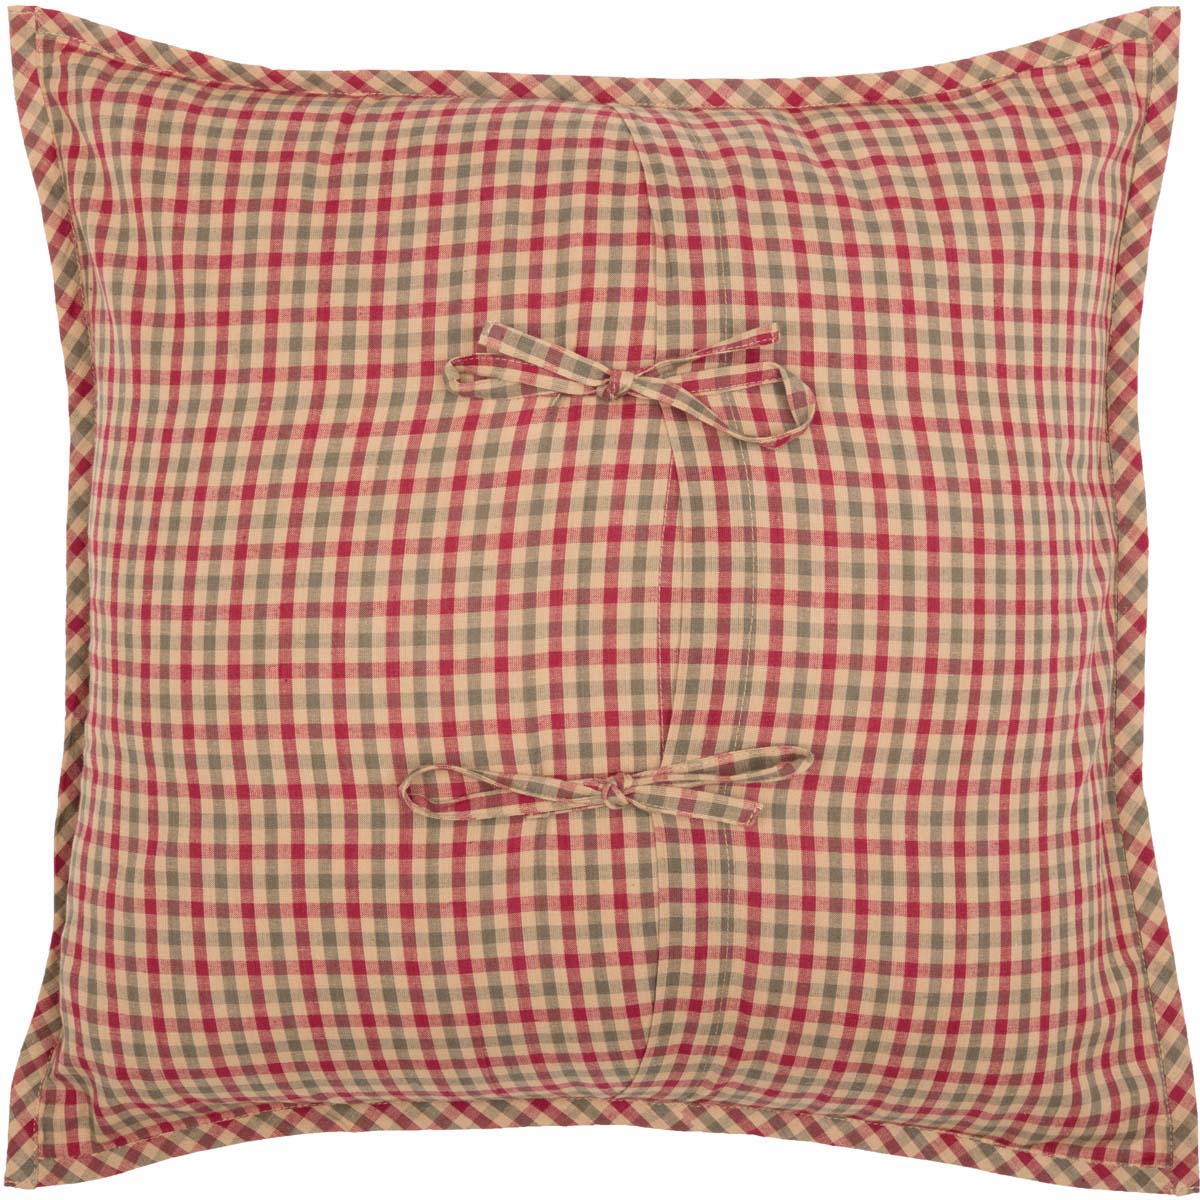 Dolly Star Patchwork 18" Red and Green Pillow